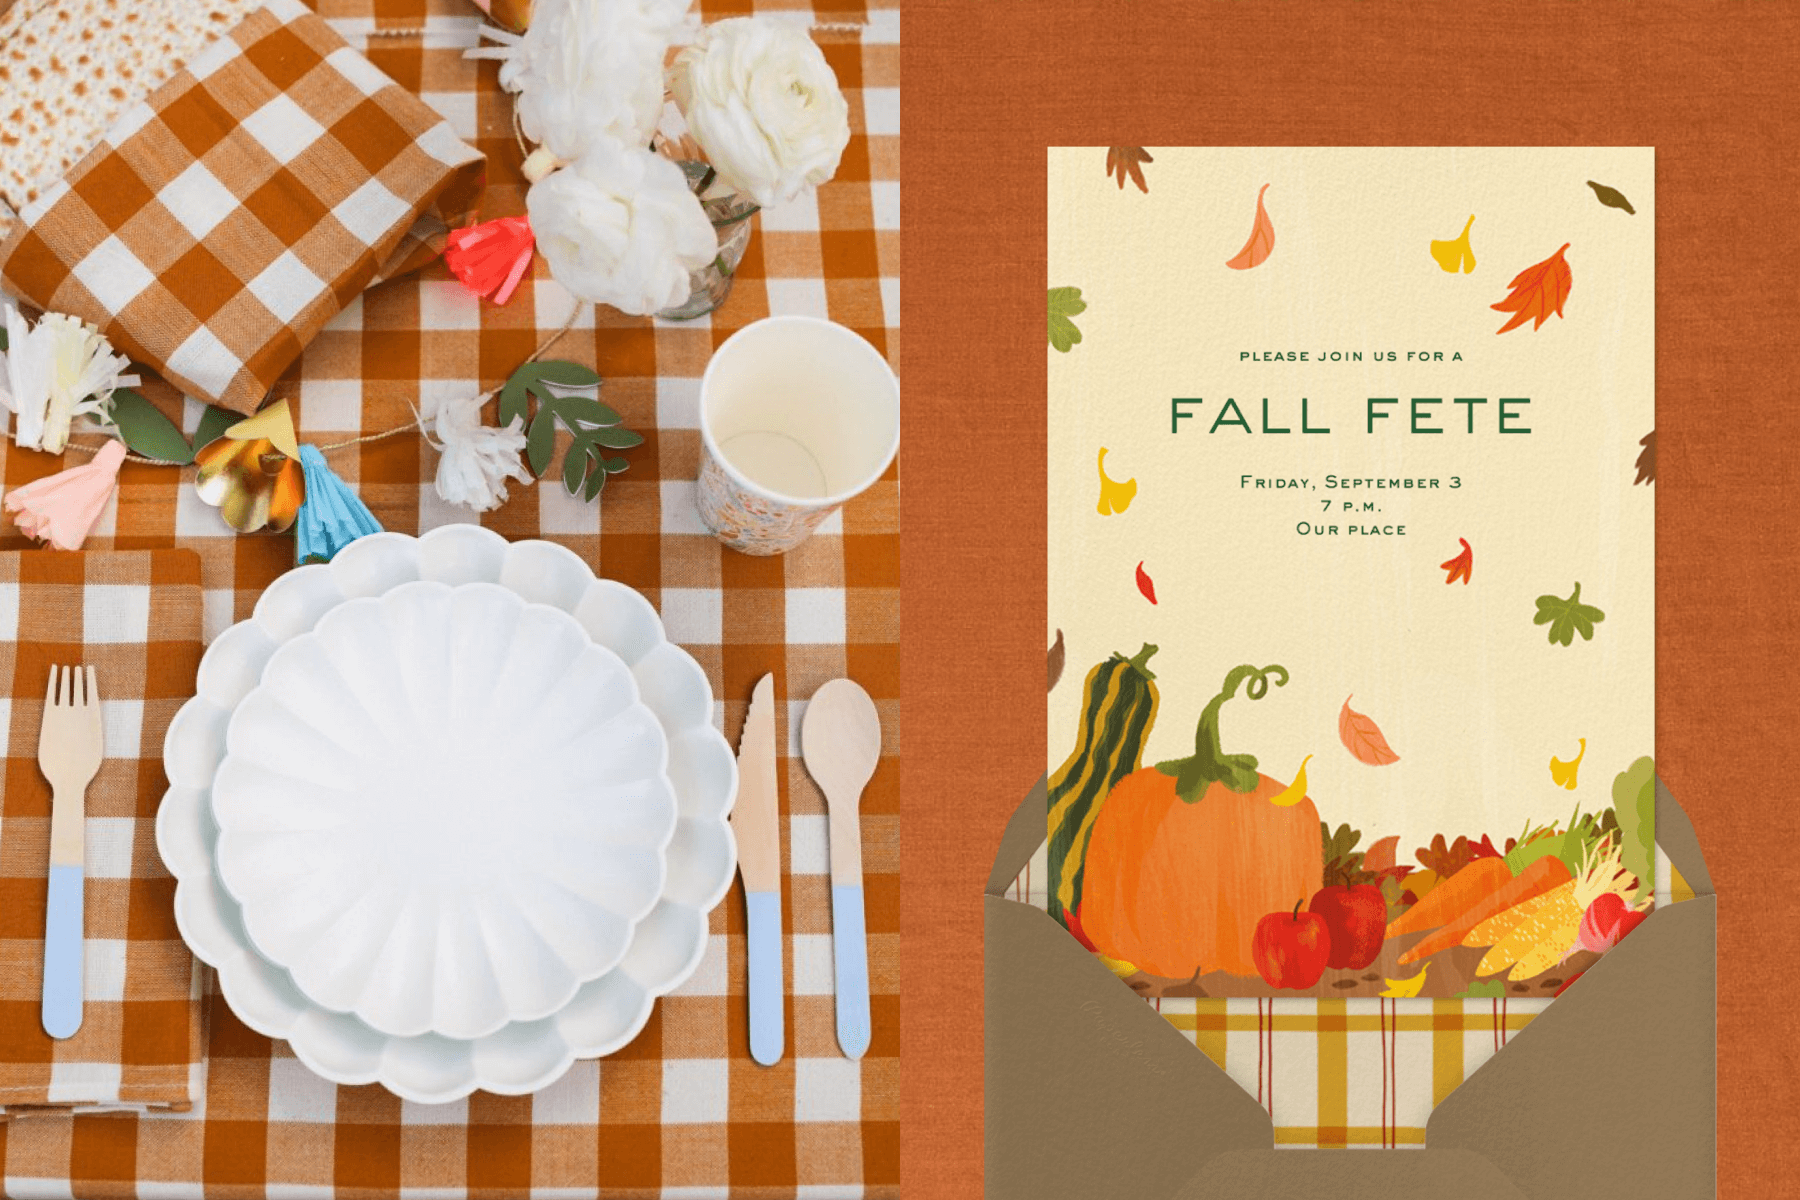 Left: Overhead photo of a single place setting featuring orange buffalo plaid tablecloth and napkin, white scalloped plates, and blue wooden cutery; Right: A fall invitation featuring an illustration of leaves falling over a scene of fall produce like apples, pumpkin, and corn.